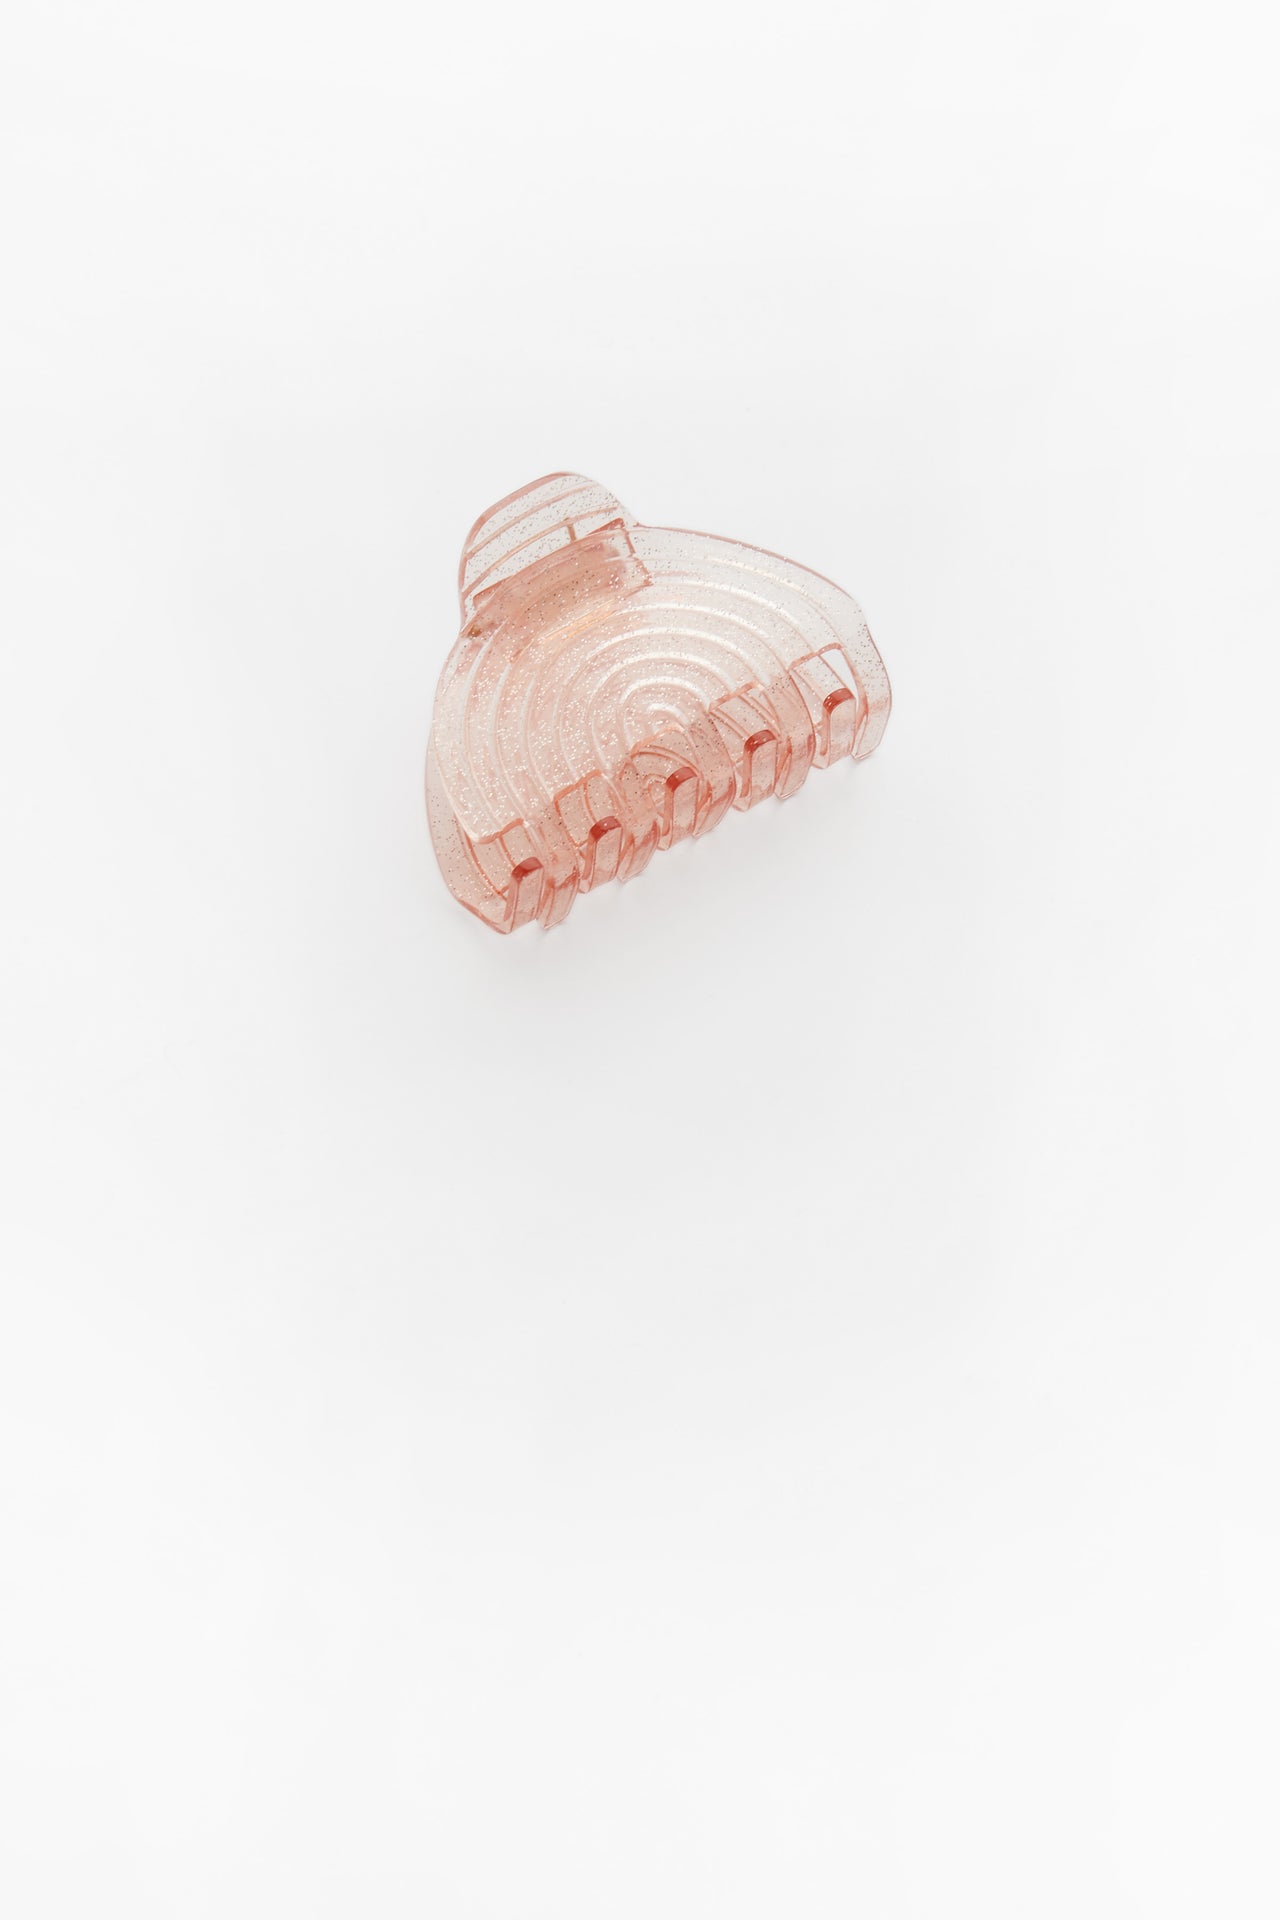 Airlie Clip in Pale Pink